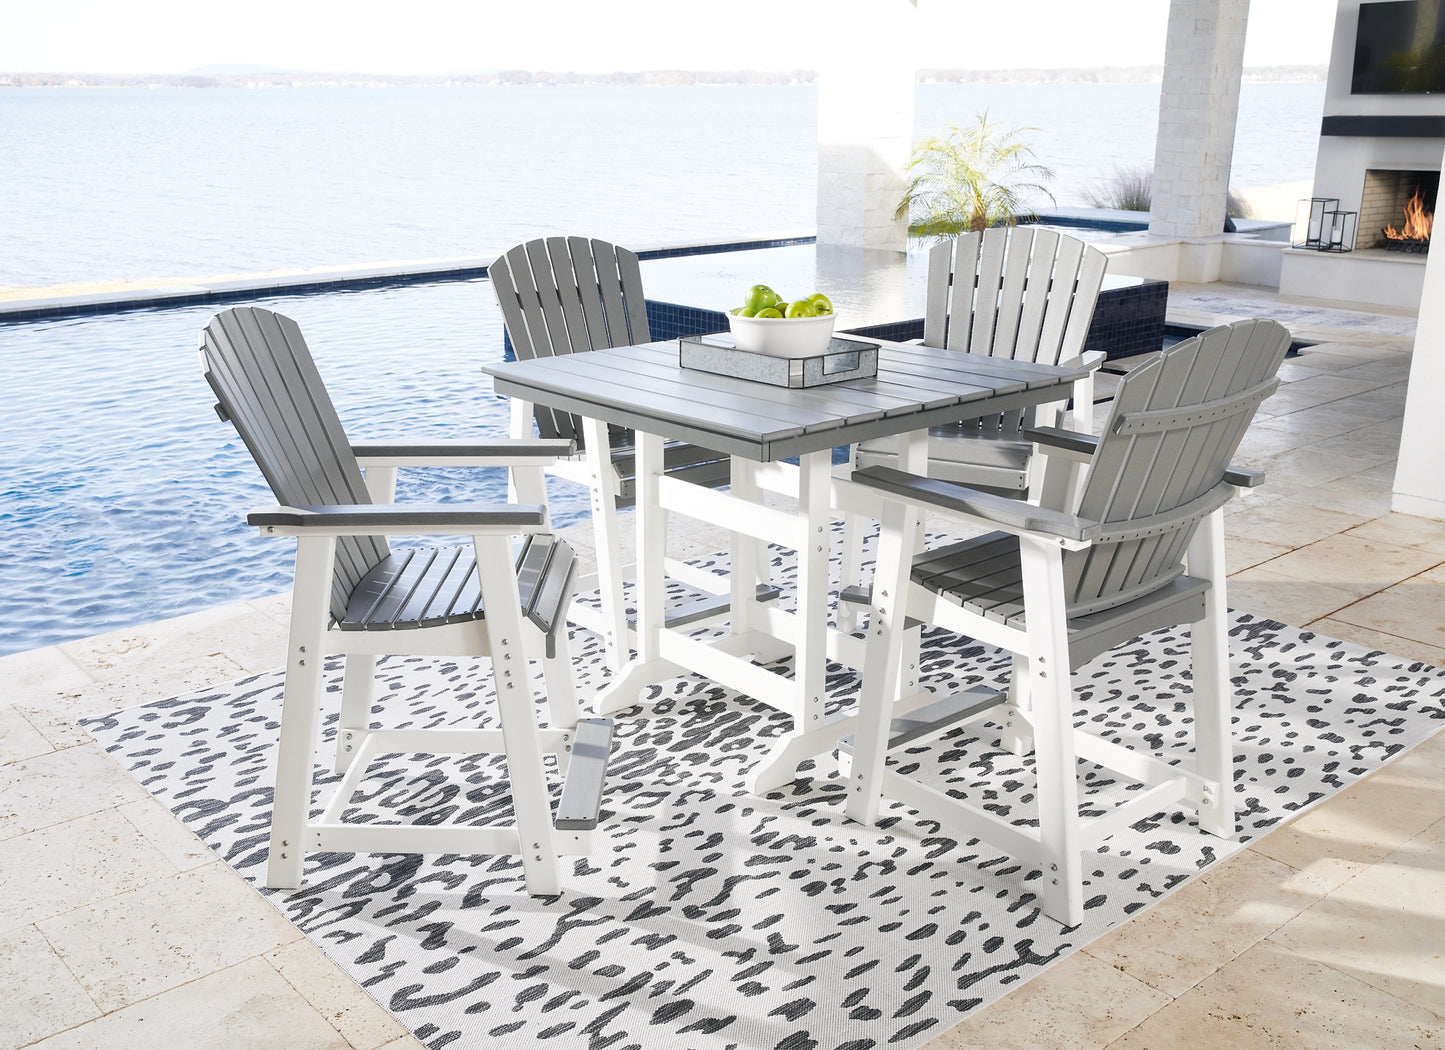 Transville Outdoor Counter Height Dining Table and 4 Barstools Wilson Furniture (OH)  in Bridgeport, Ohio. Serving Moundsville, Richmond, Smithfield, Cadiz, & St. Clairesville